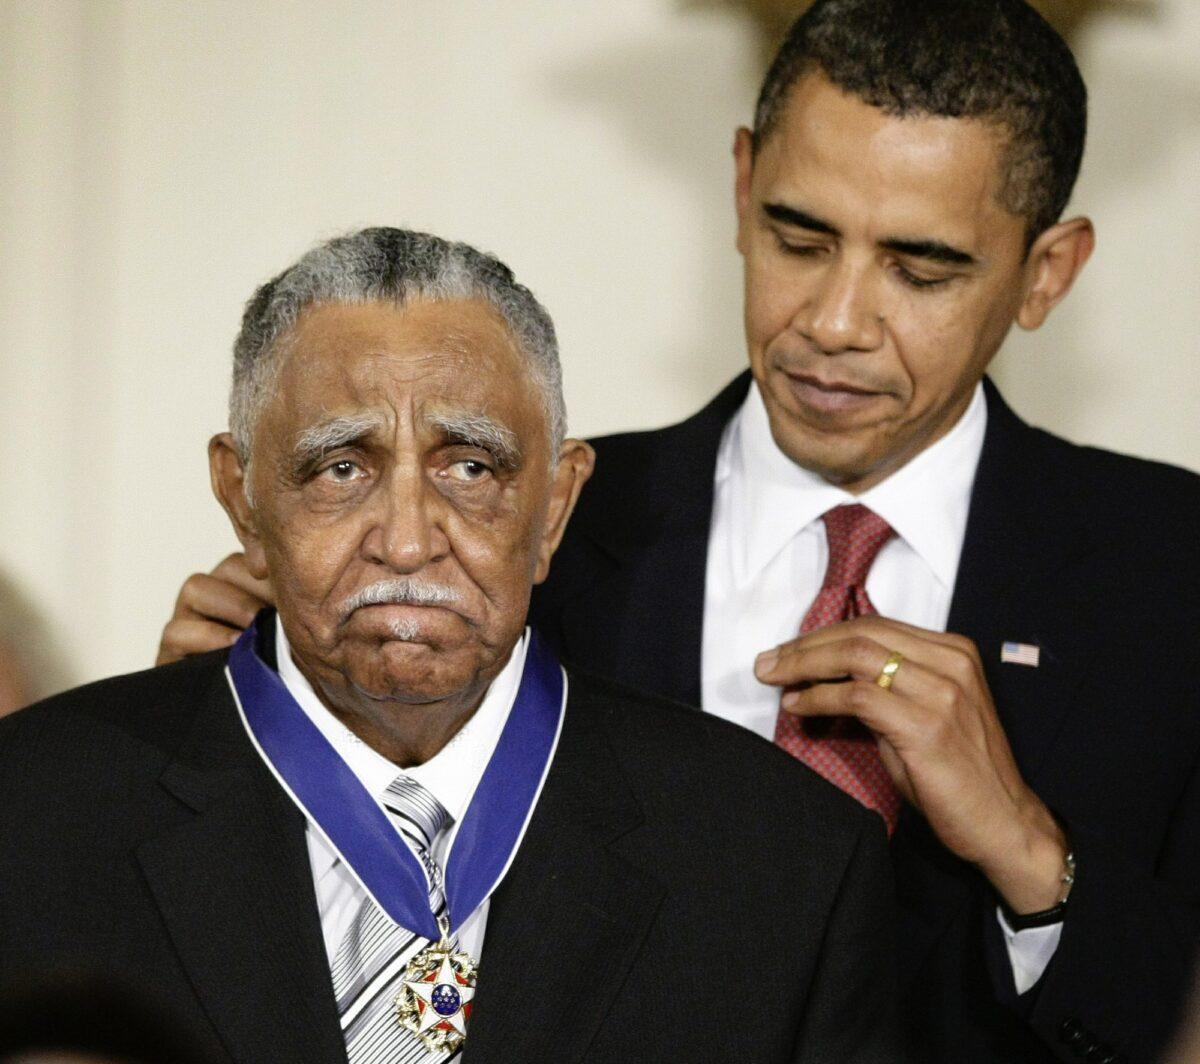 Former President Barack Obama presents the 2009 Presidential Medal of Freedom to the Rev. Joseph E. Lowery n the East Room of the the White House in Washington on Aug. 12, 2009. (J. Scott Applewhite/AP Photo)